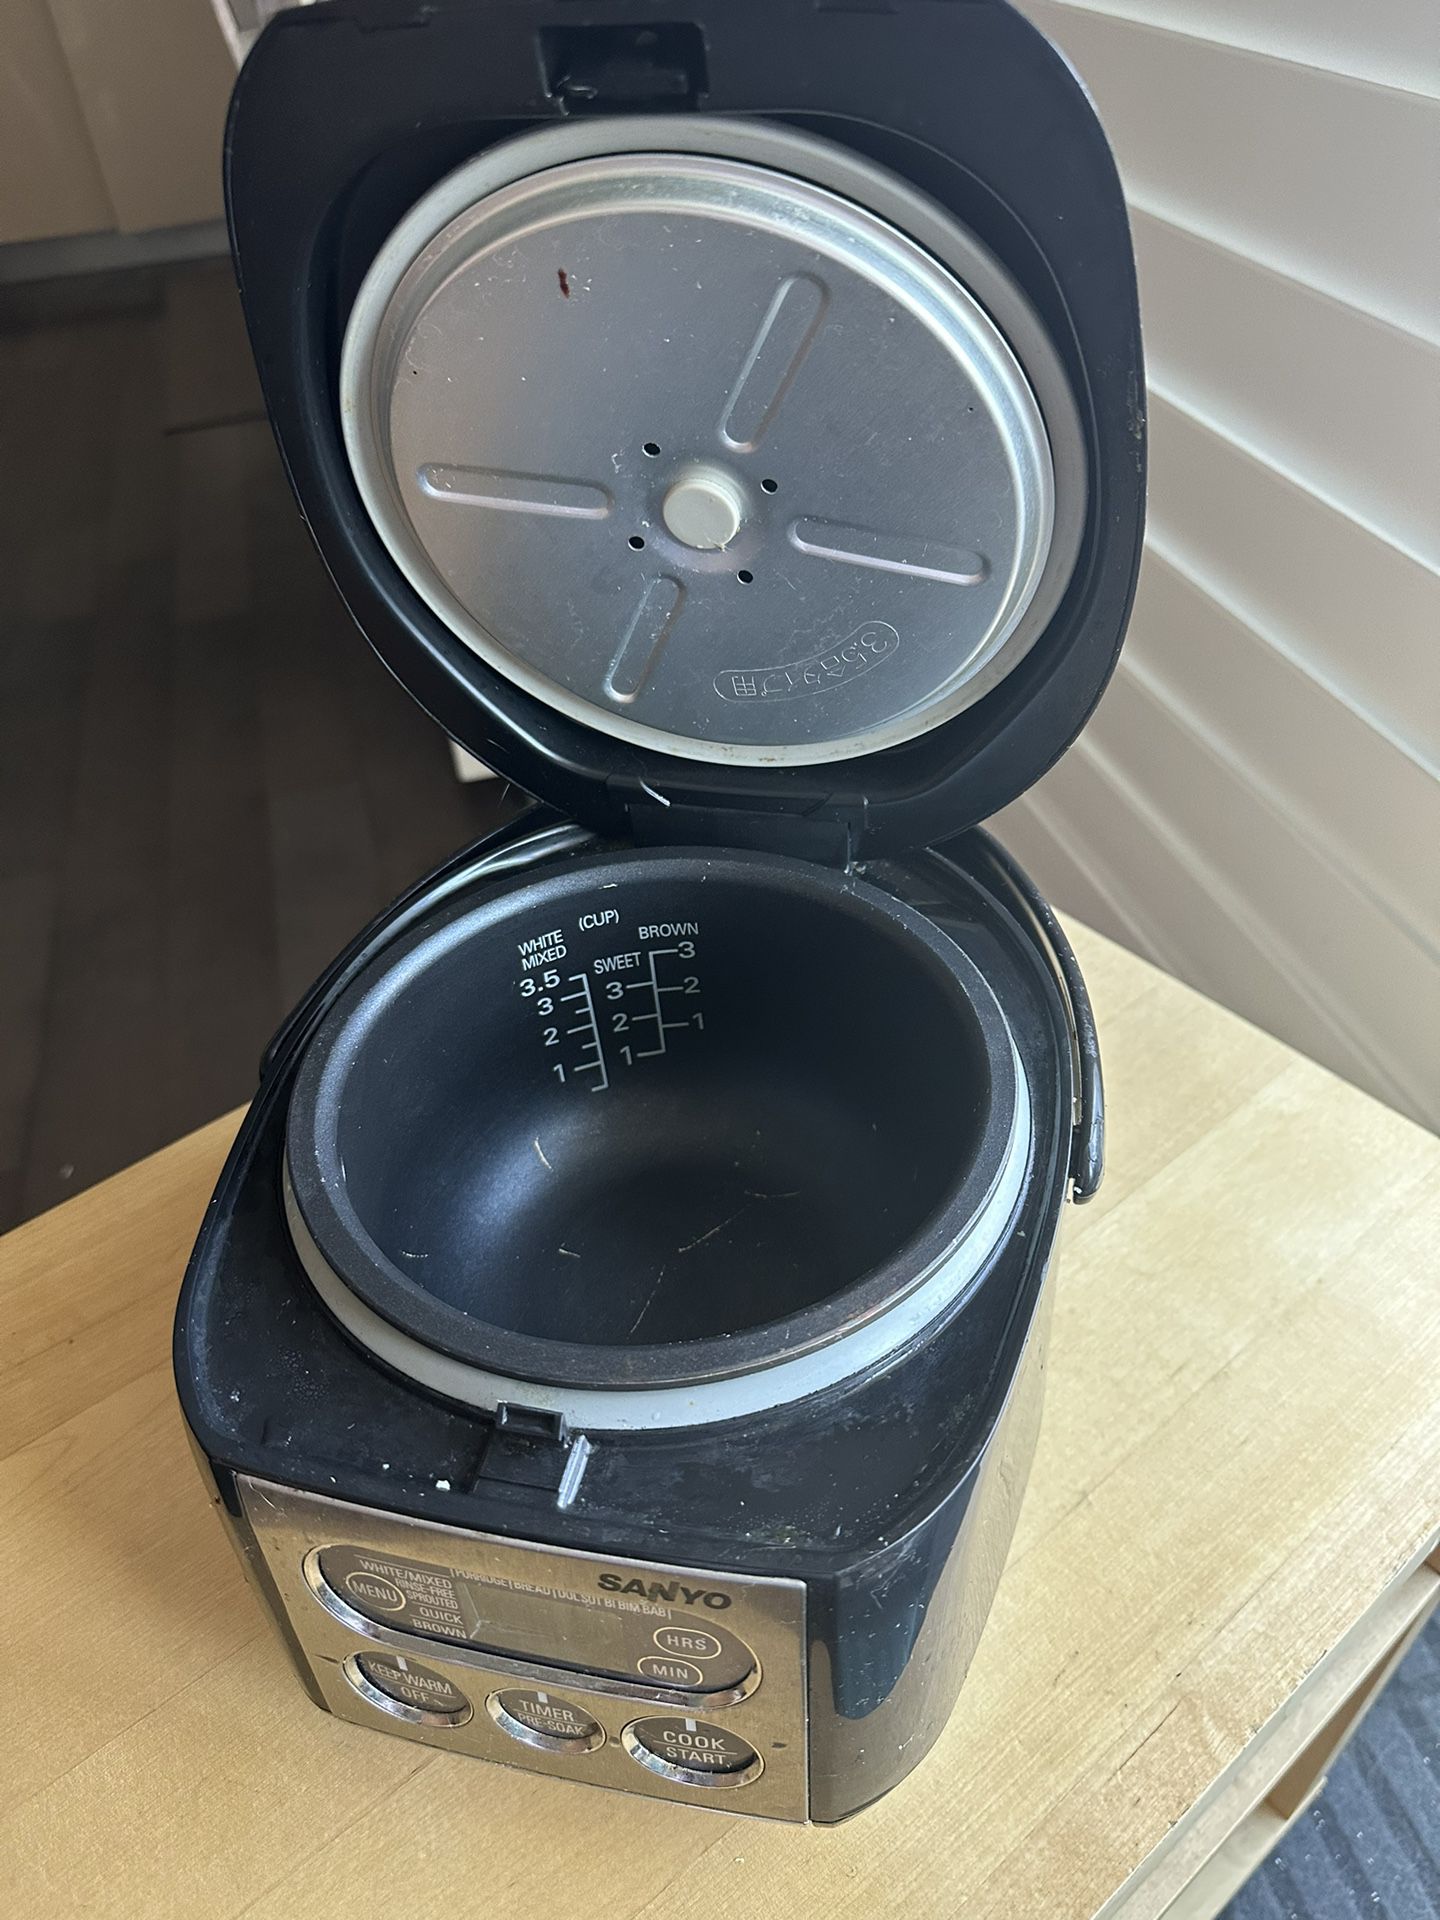 Sanyo Mini Rice Cooker for Sale in Windsor Hills, CA - OfferUp